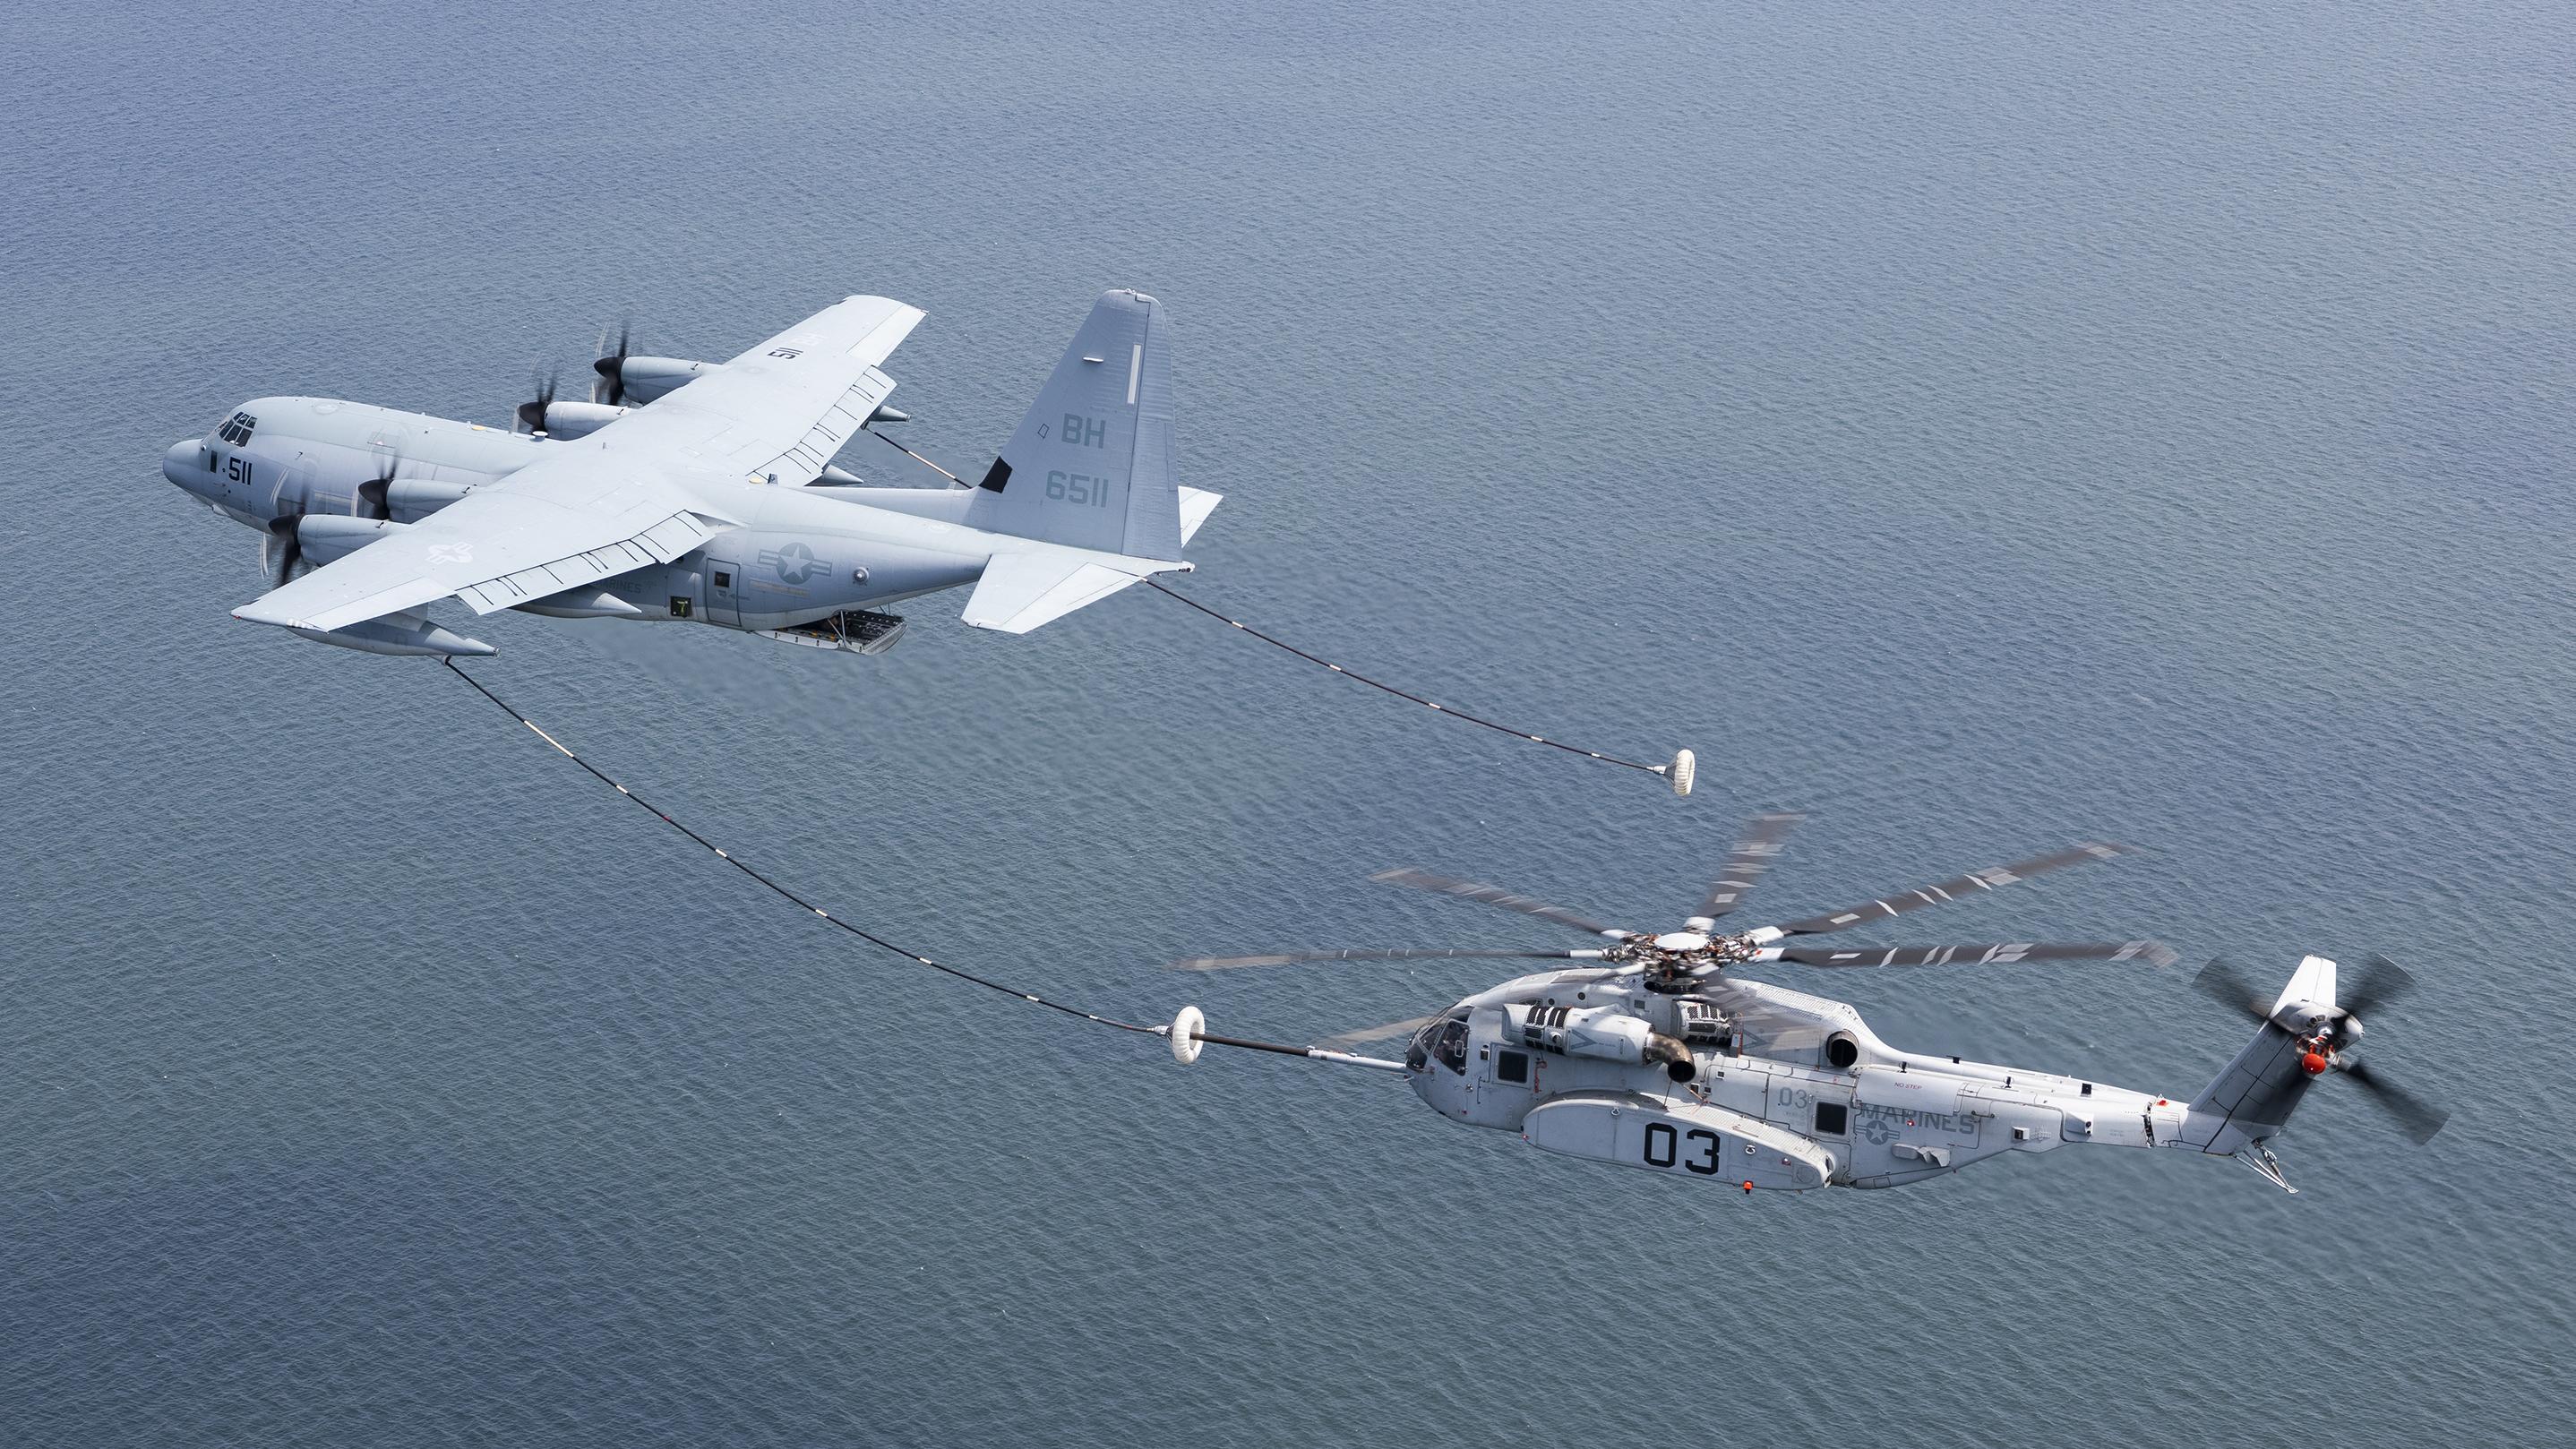 The CH-53K King Stallion successfully plugs into a funnel-shaped drogue towed behind a KC-130J during aerial refueling wake testing over the Chesapeake Bay. U.S. Navy Photo.s